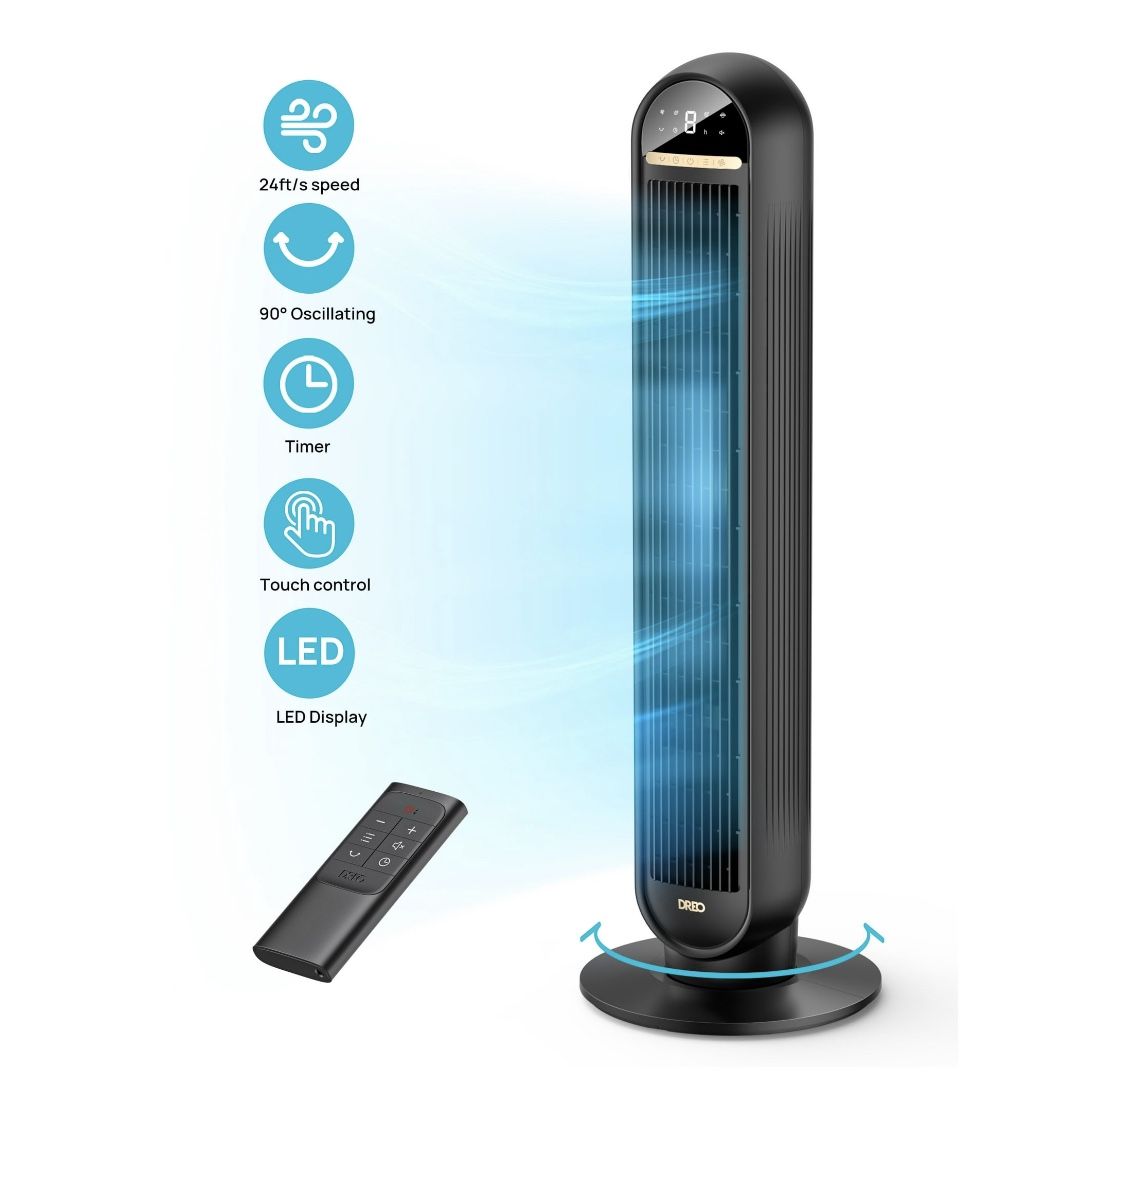 Dreo Tower Fans for Home, 2023 NEW 36" Standing Floor Fan with Remote, 90° Oscillating Fan, 24 ft/s High Velocity, LED Display, 4 Speeds, 4 Modes, 8H 